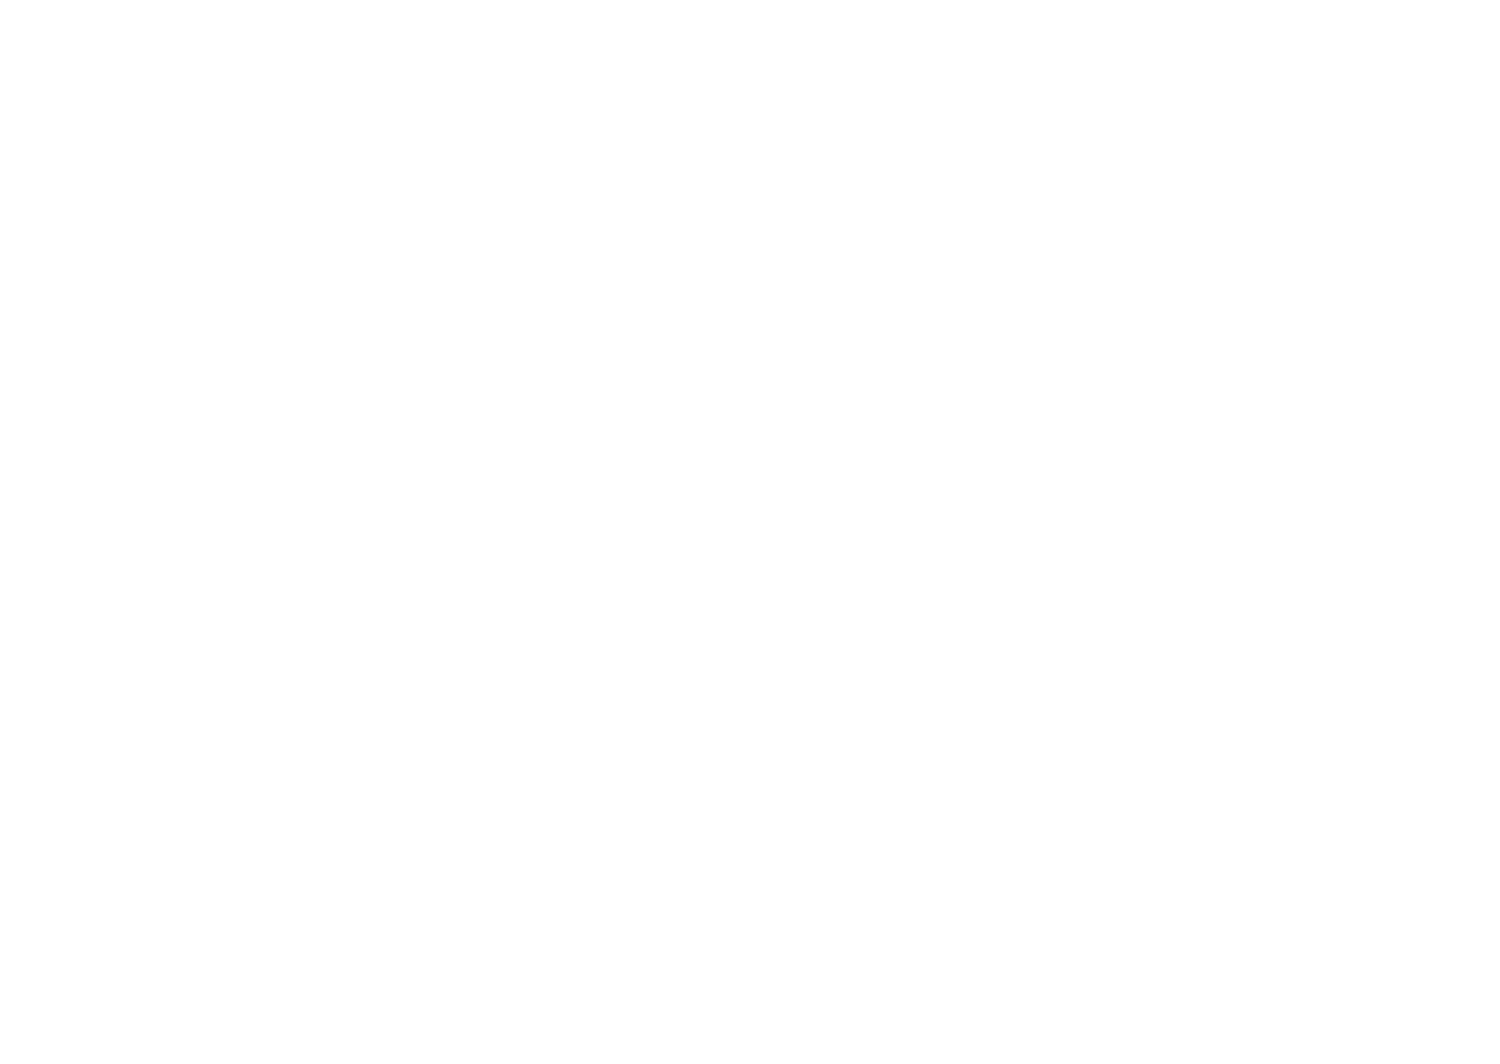 Positive Light Projects